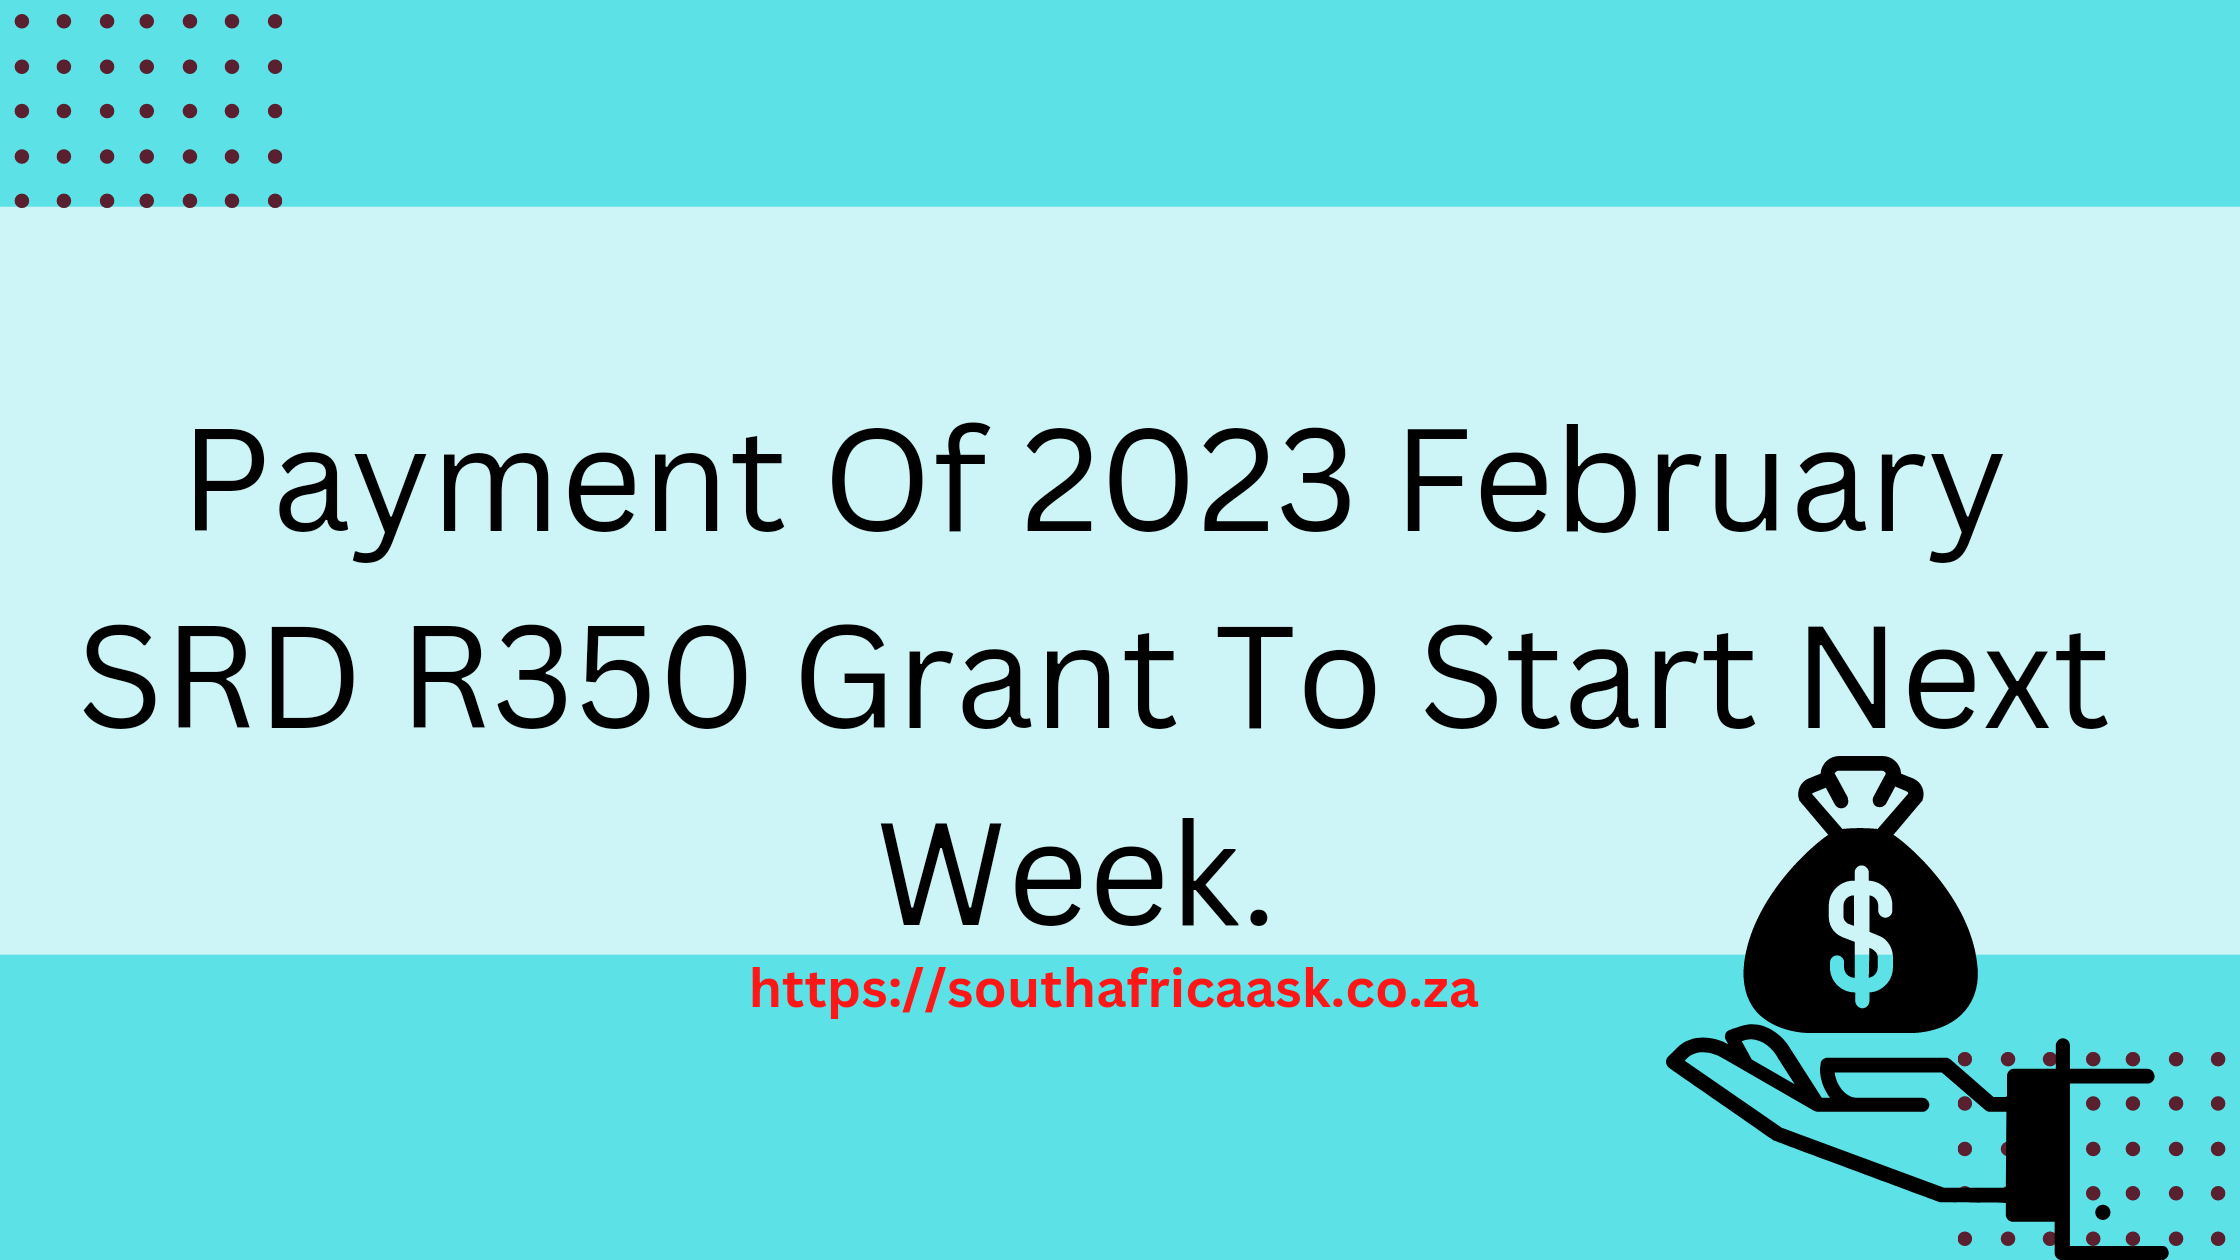 Payment Of 2023 February SRD R350 Grant To Start Next Week.